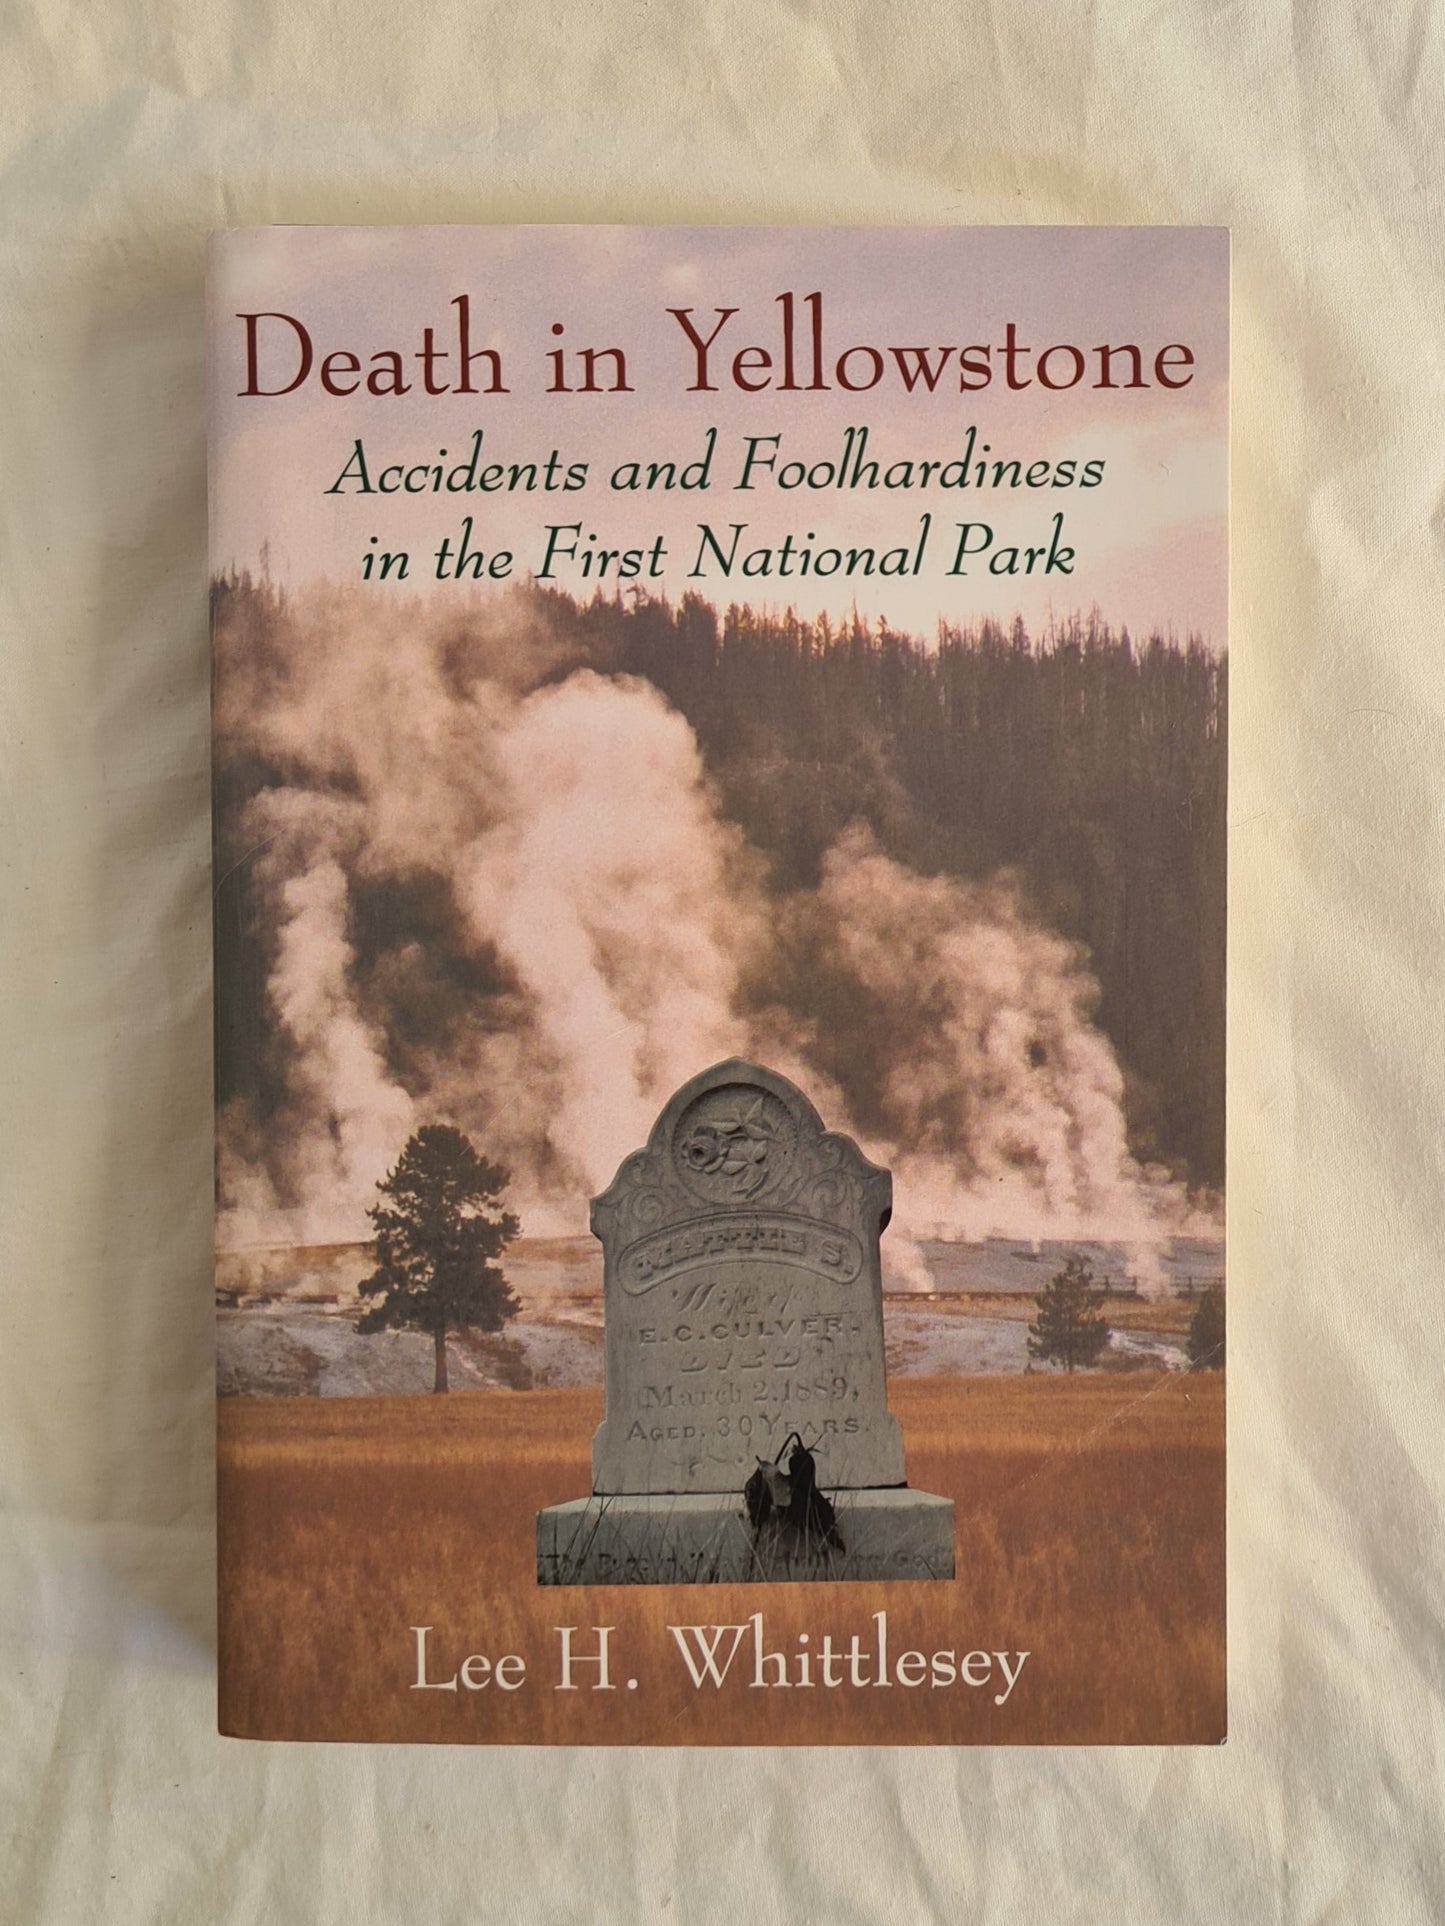 Death in Yellowstone by Lee H. Whittlesey